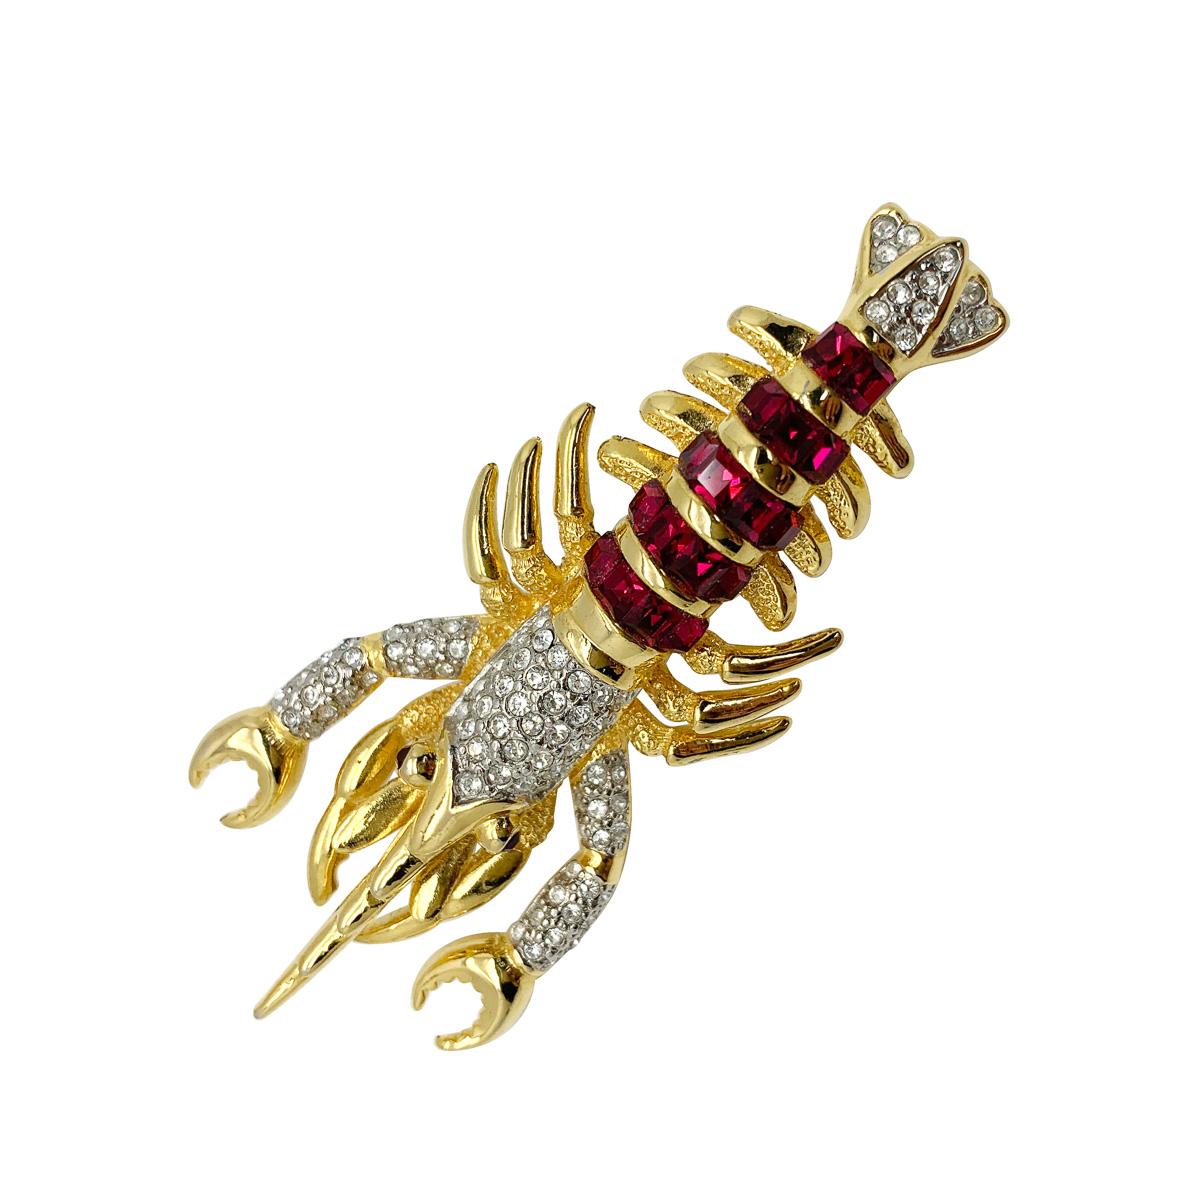 A Vintage Lobster Brooch. Beautifully crafted with pave white chatons and square fancy cut vibrant red crystals against a lustrous gold backdrop. Whimsical and super stylish. Be the one to stand out with unique jewels.

Vintage Condition: Very good